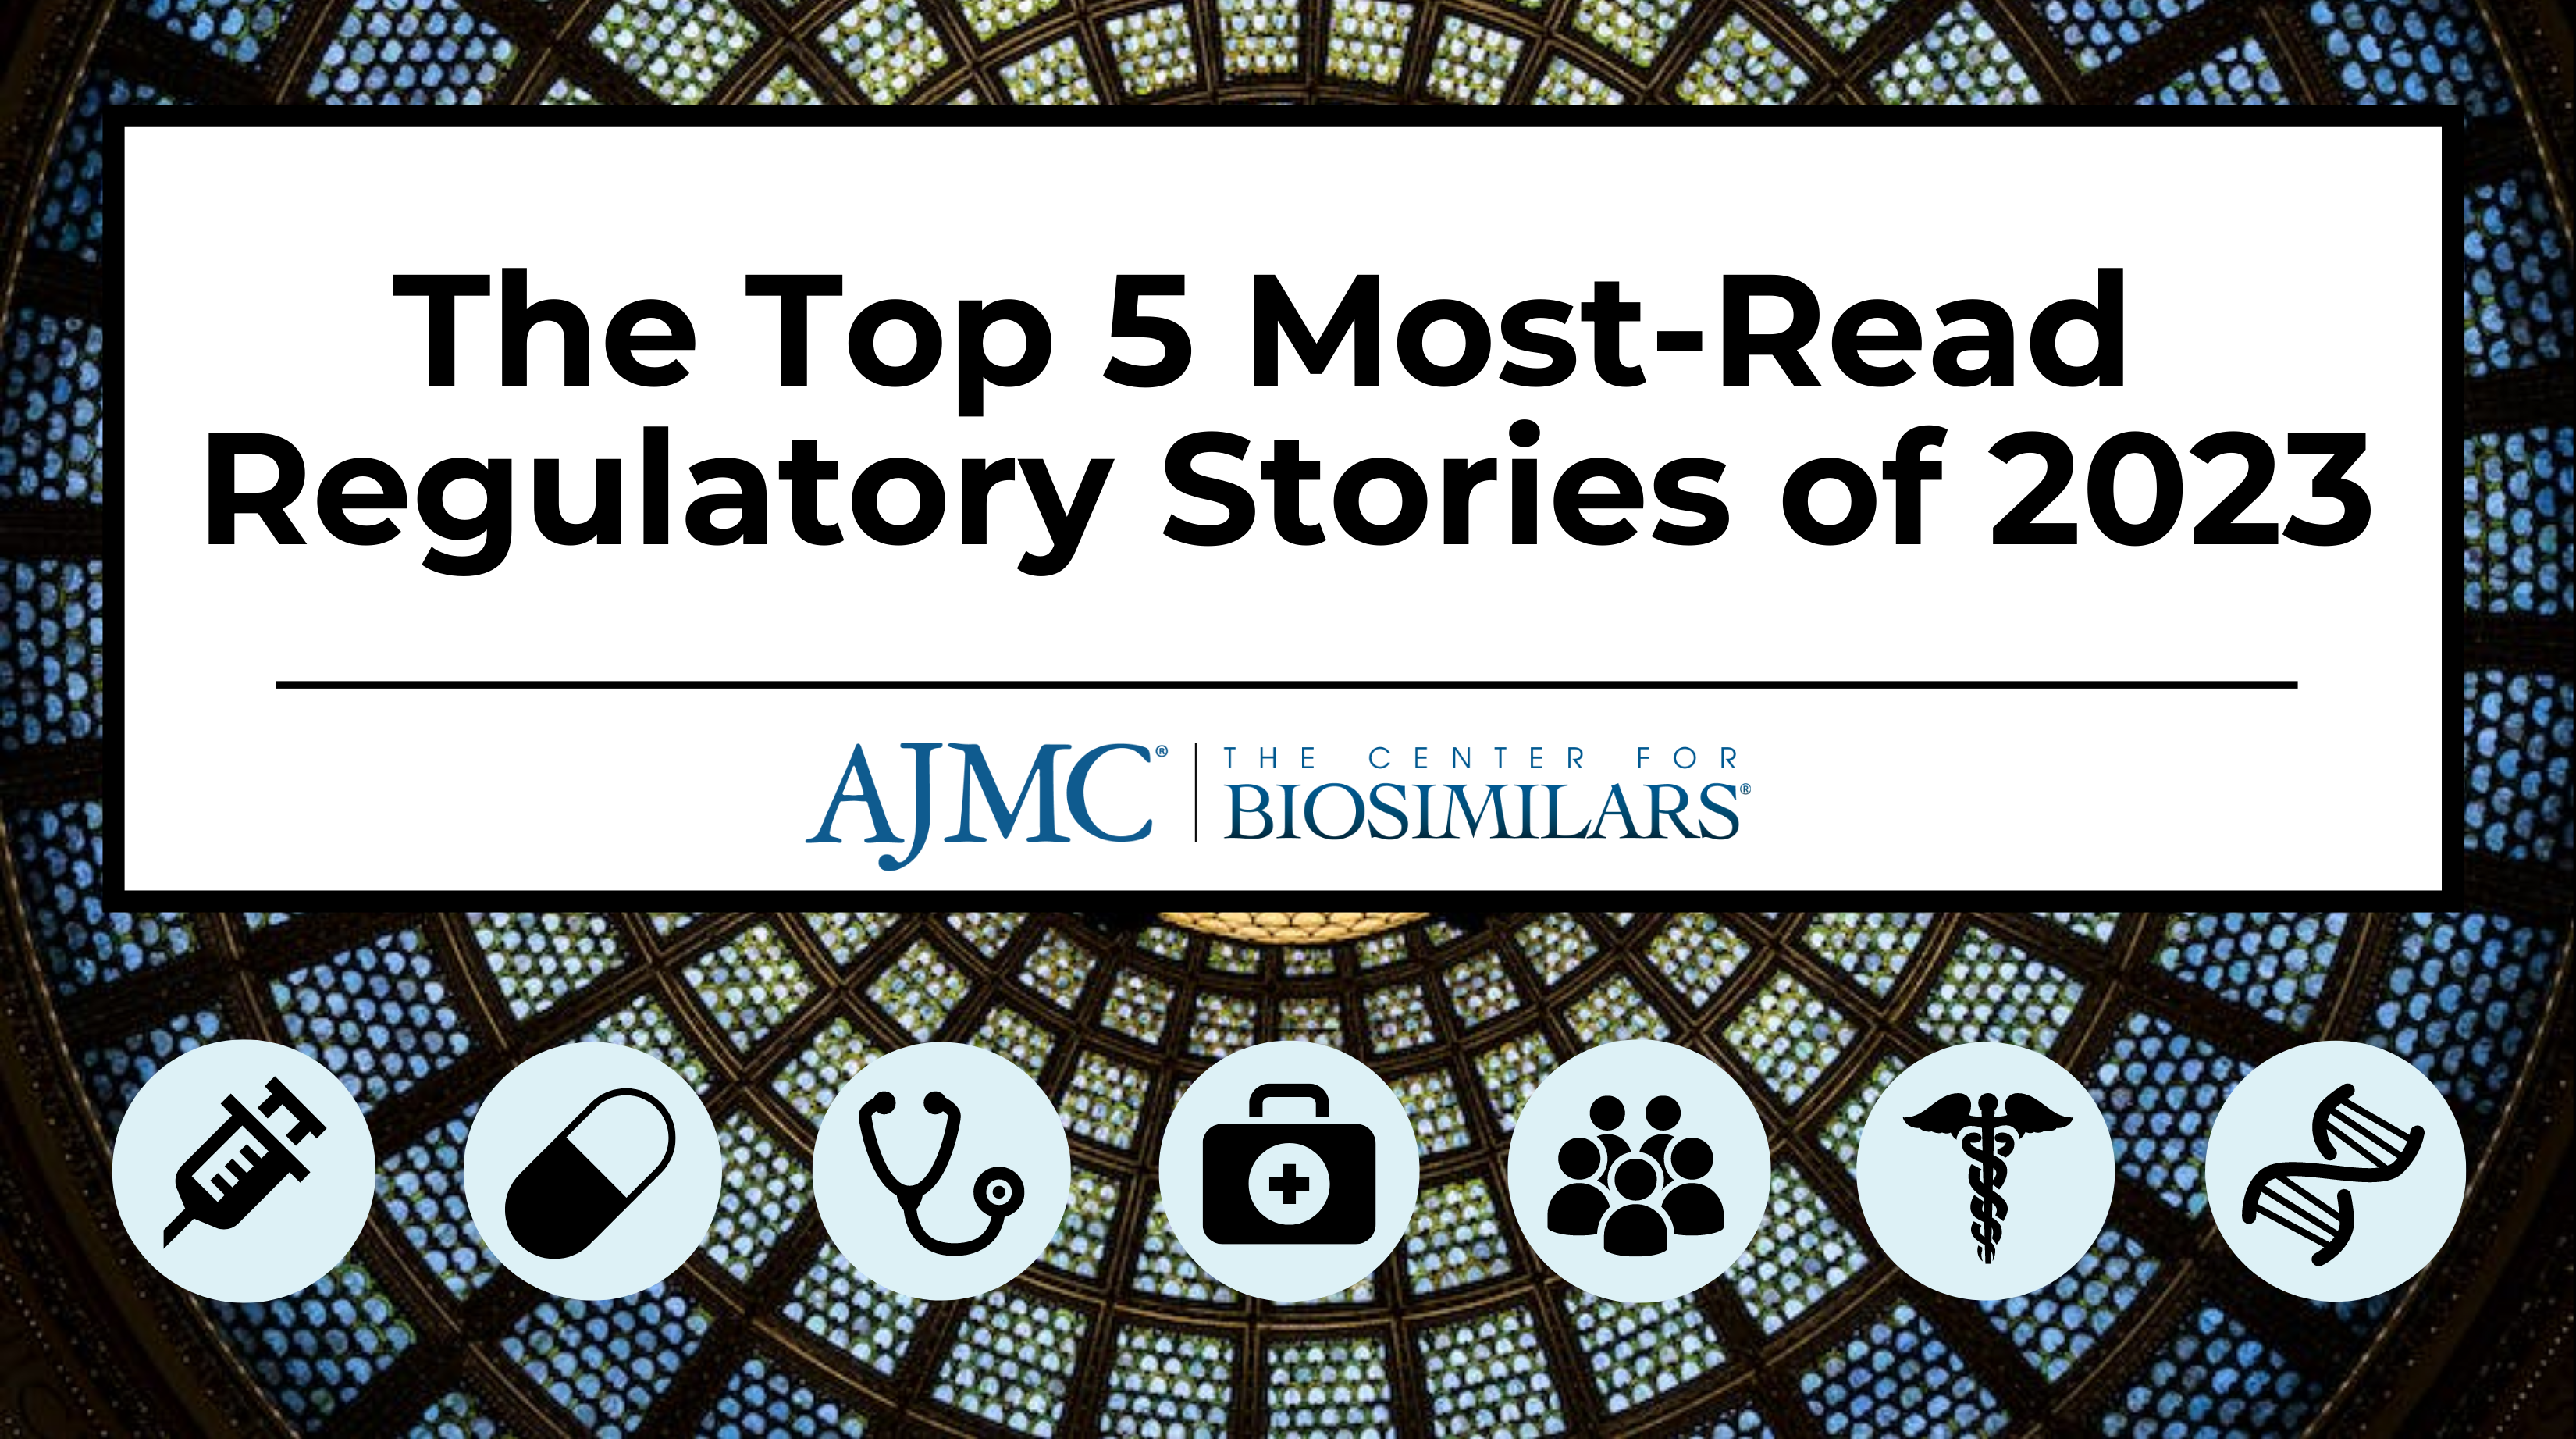 The Top 5 Most-Read Regulatory Stories of 2023